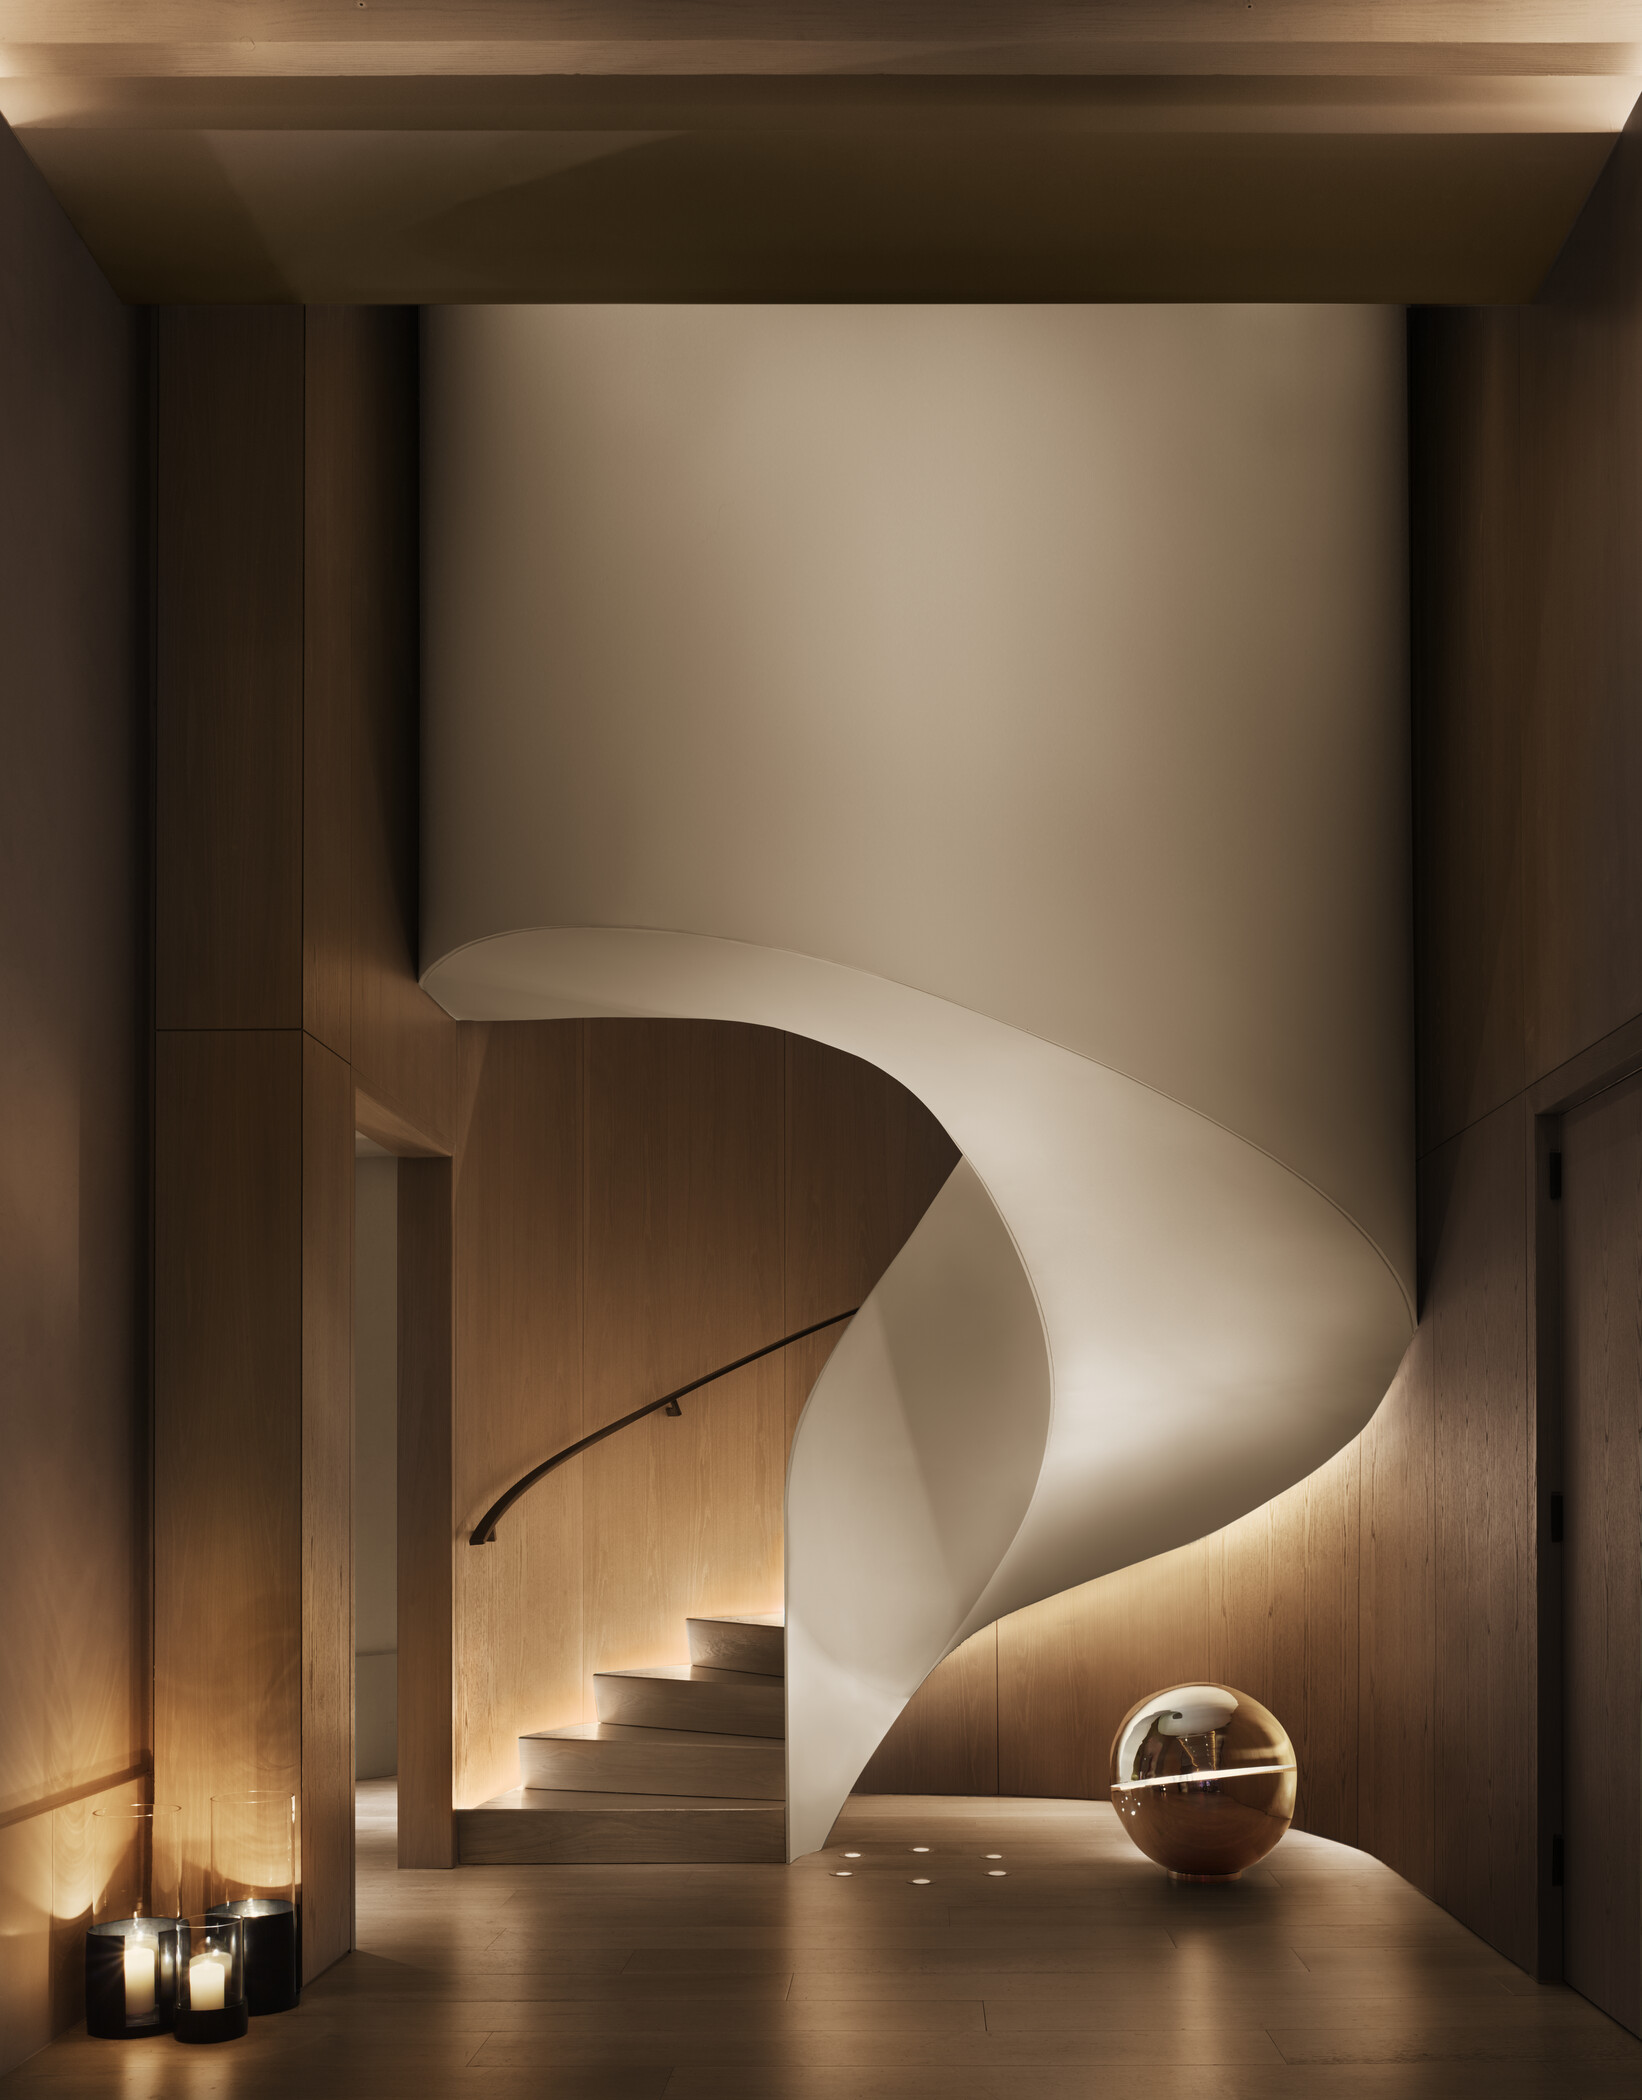 Central staircase with accent lighting